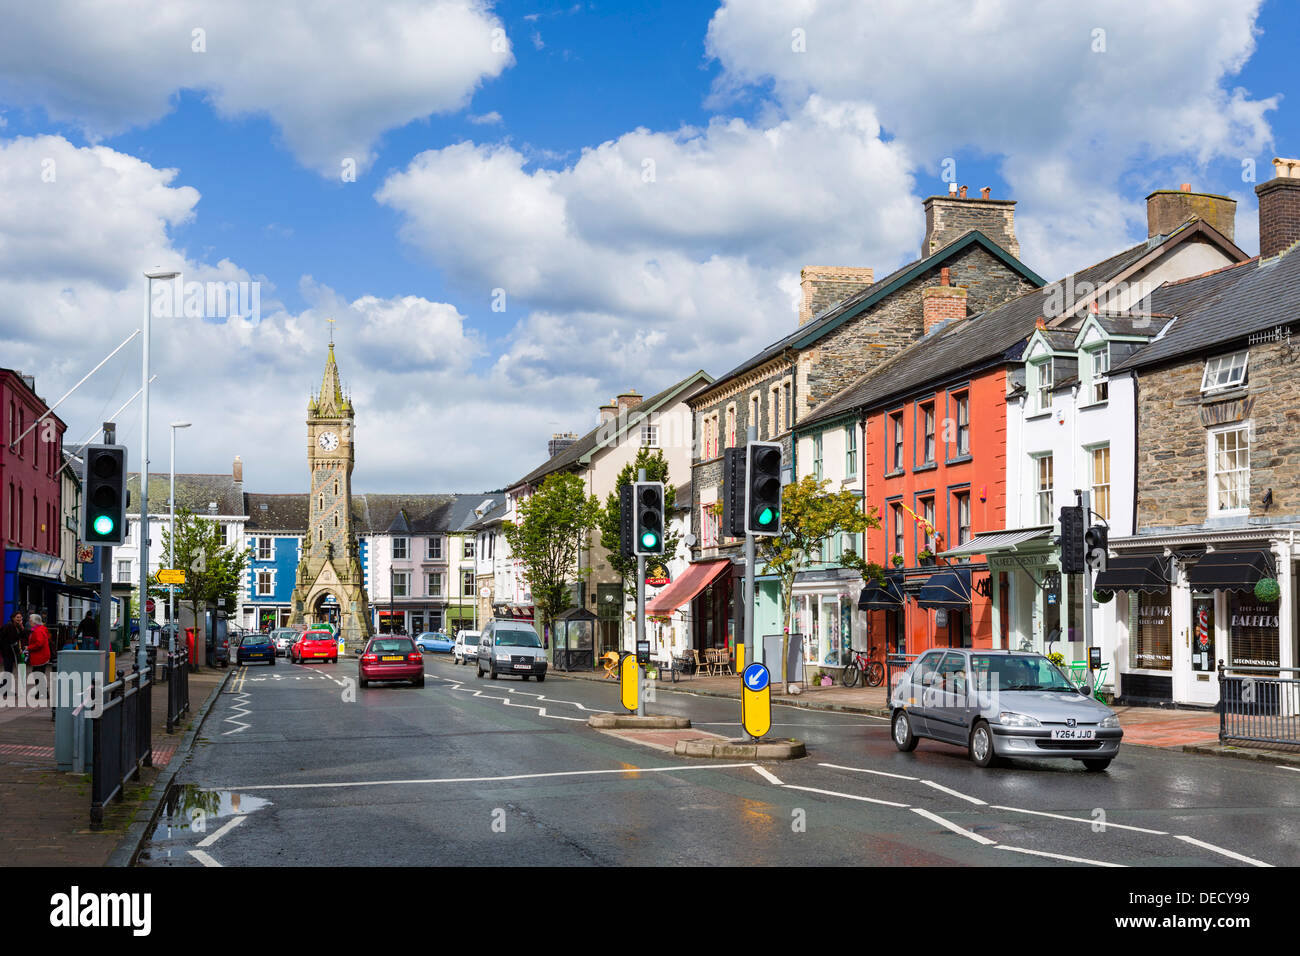 View down Heol Maengwyn in the town centre with the clock tower in the distance, Machynlleth, Powys, Wales, UK Stock Photo